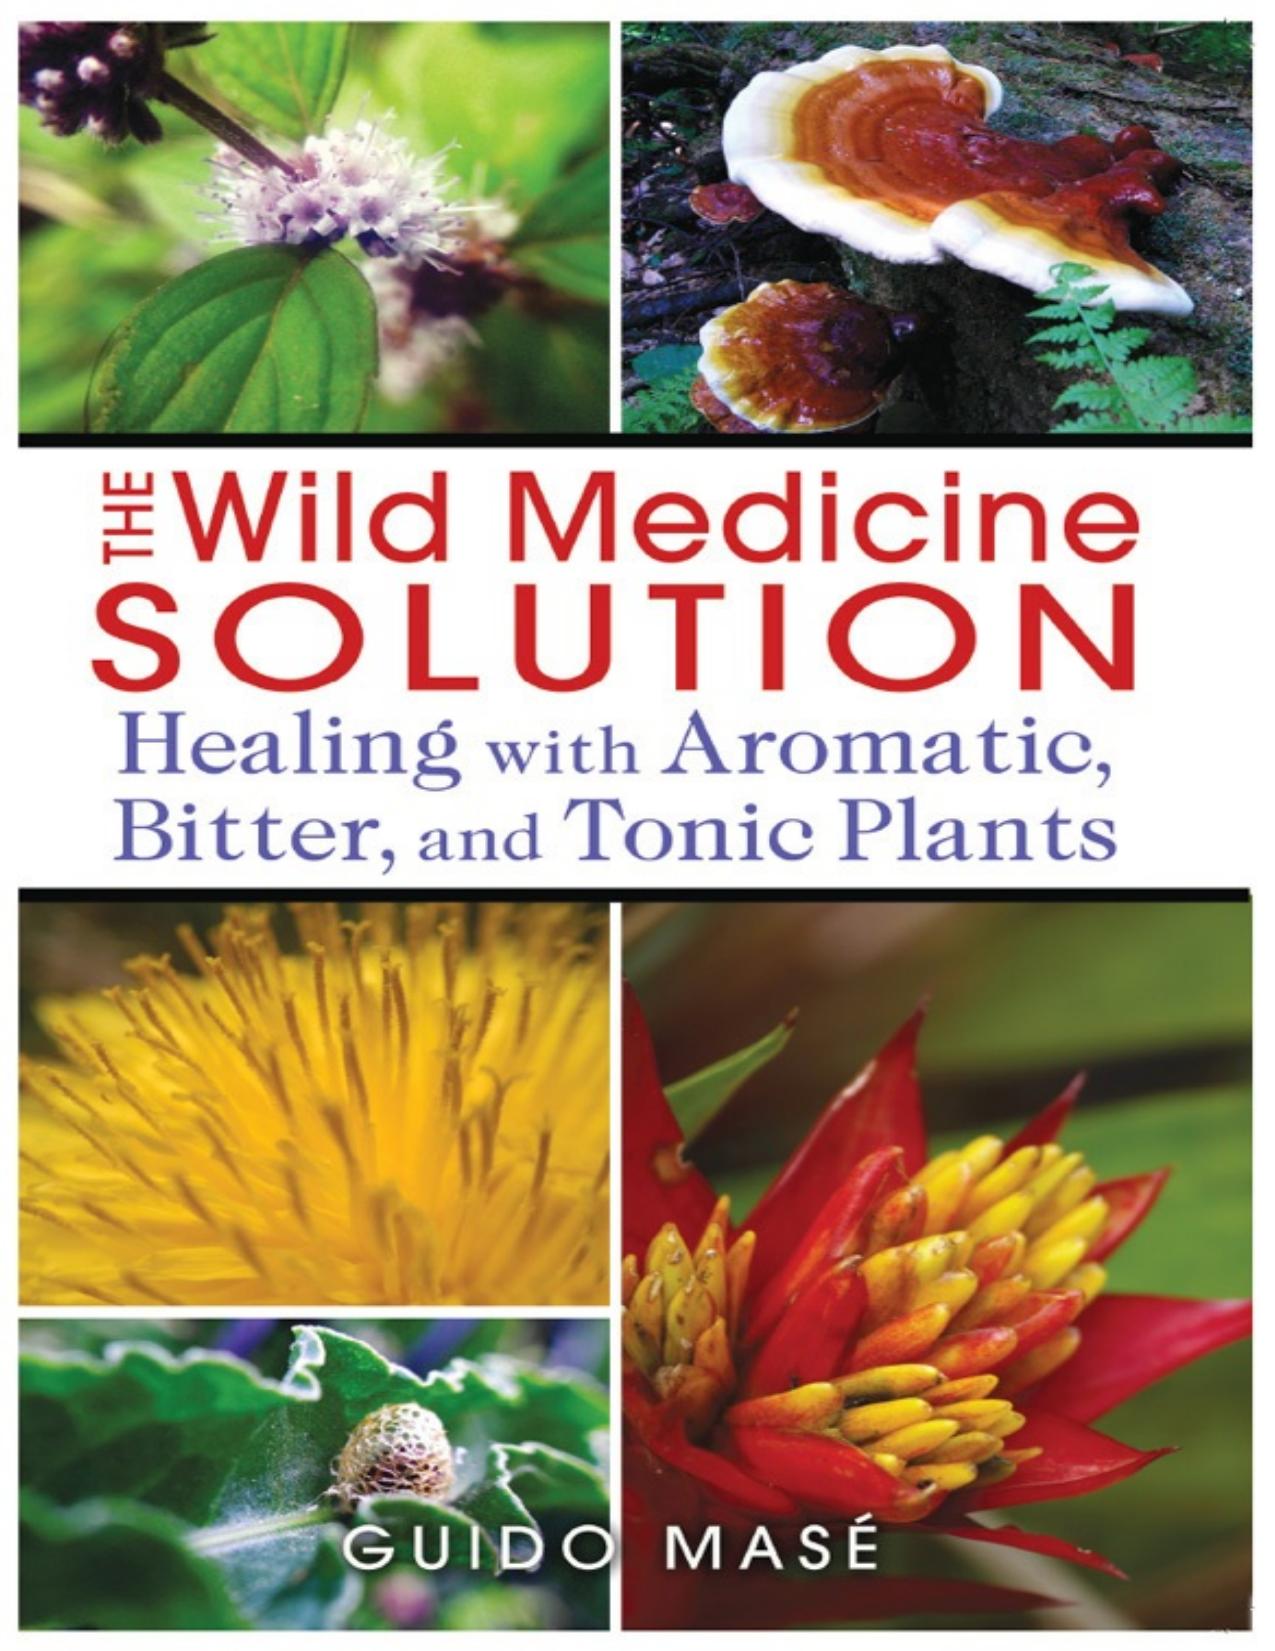 The Wild Medicine Solution: Healing with Aromatic, Bitter, and Tonic Plants - PDFDrive.com